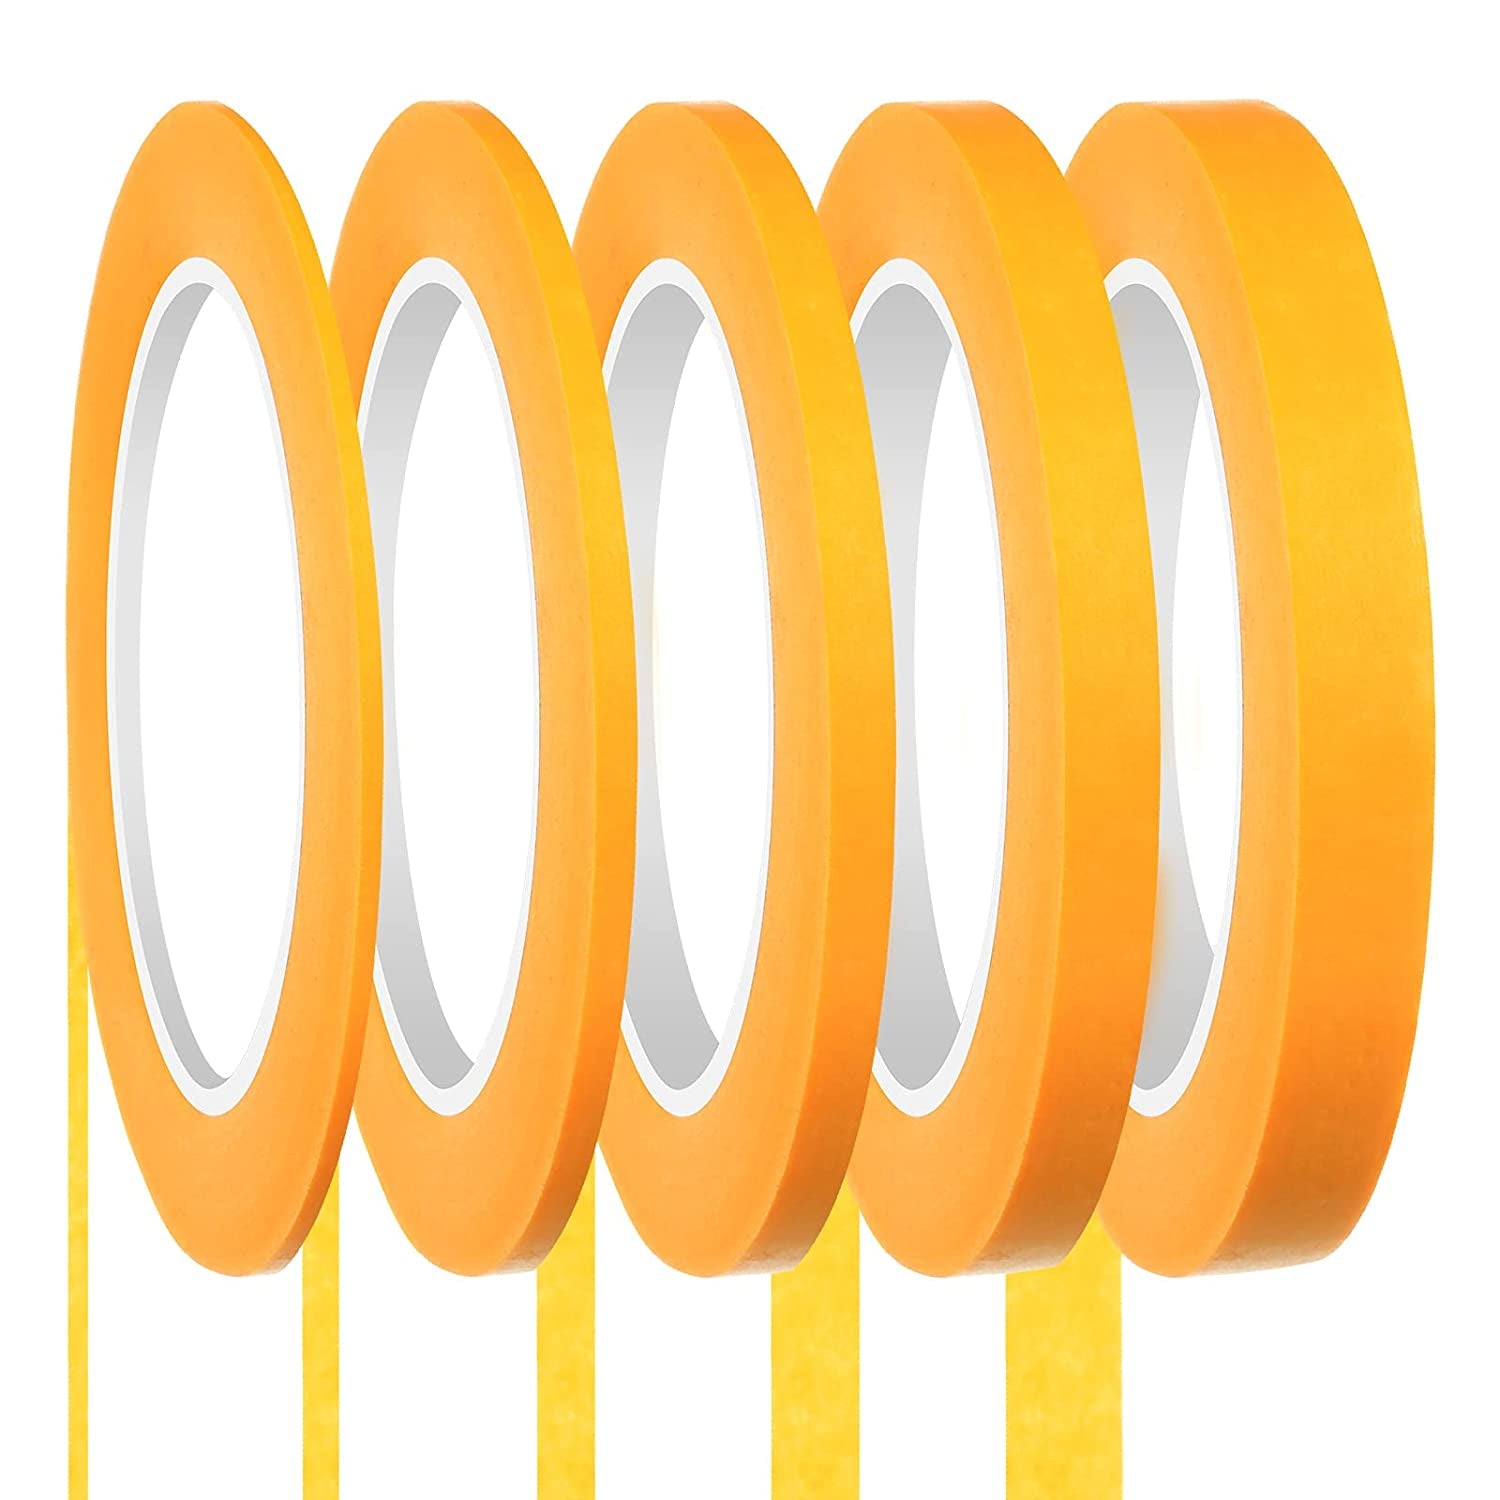 5 Rolls Pinstripe Tape 1/16, 1/8, 1/4, 1/2 and 3/4 Inch X (Yellow)